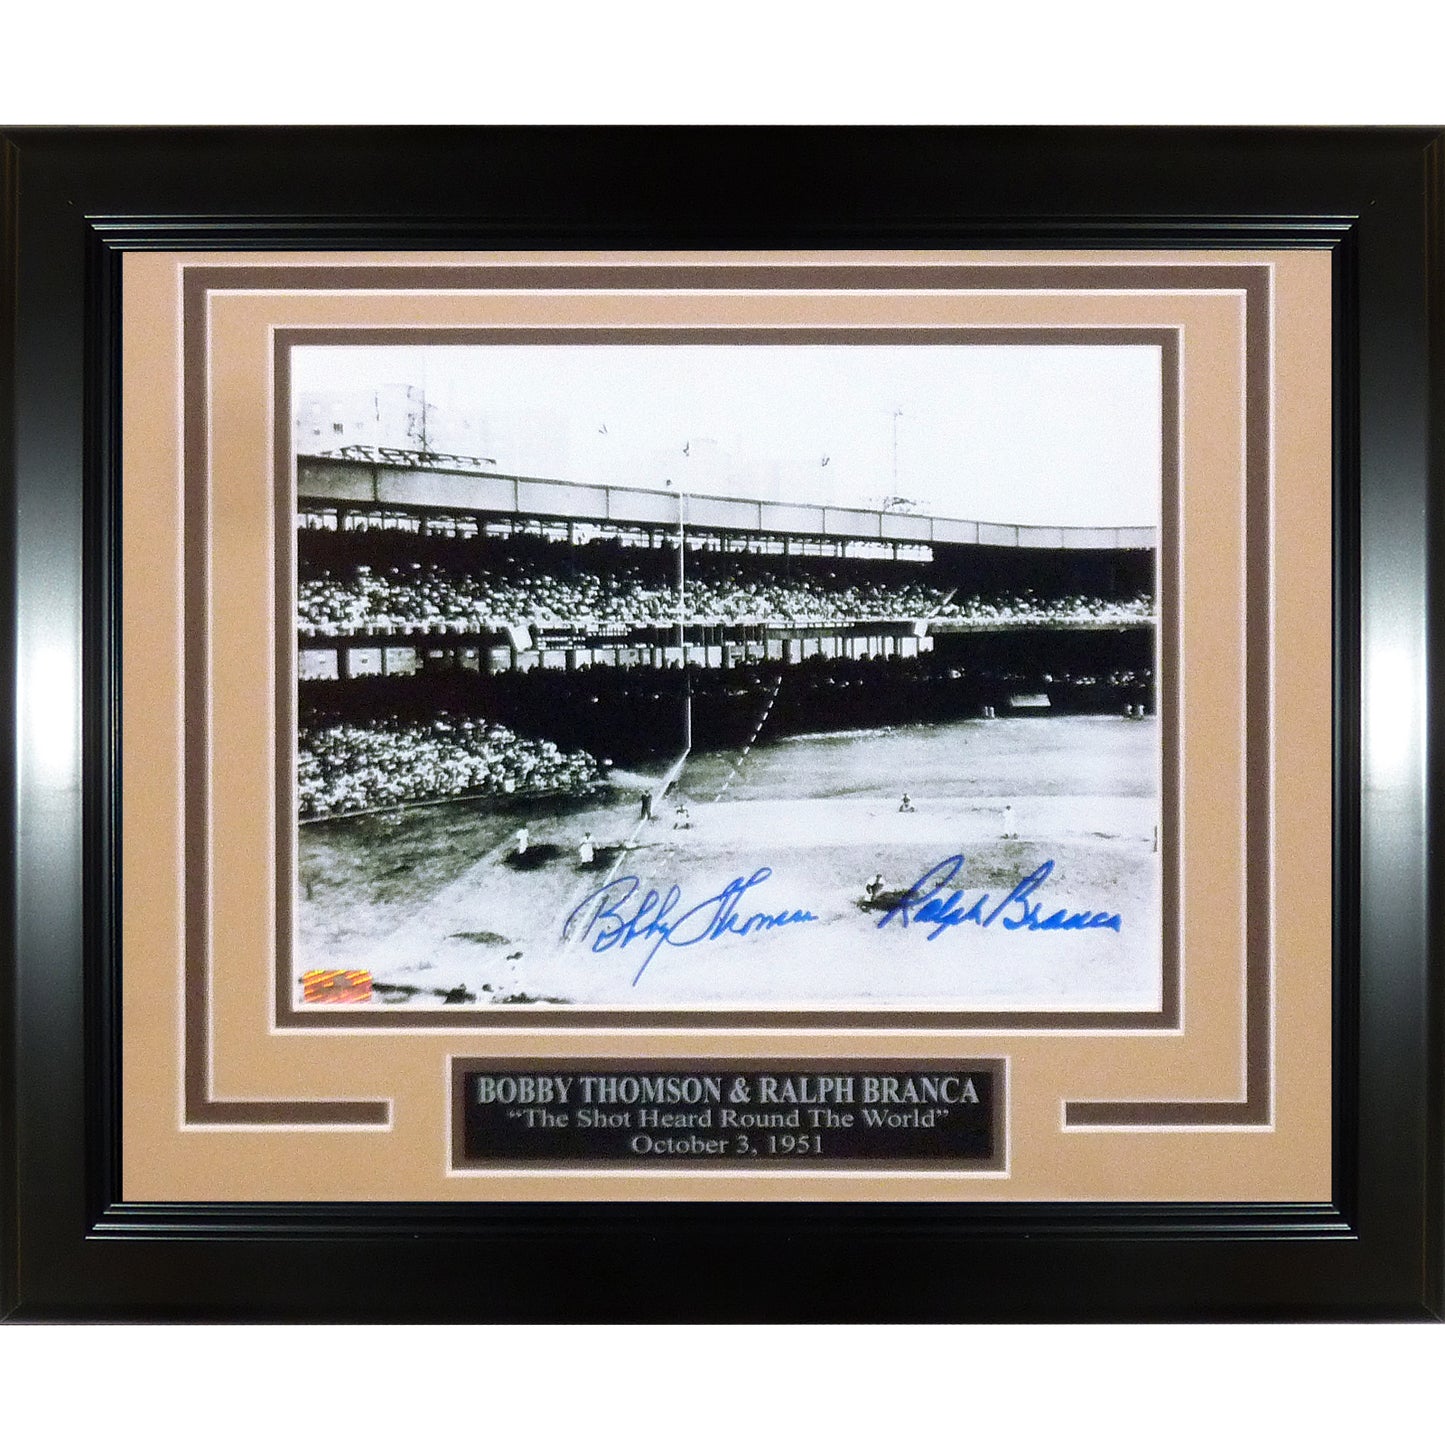 Ralph Branca And Bobby Thomson Dual Autographed "Shot" (Horizontal Dotted Line) Deluxe Framed 8x10 Photo